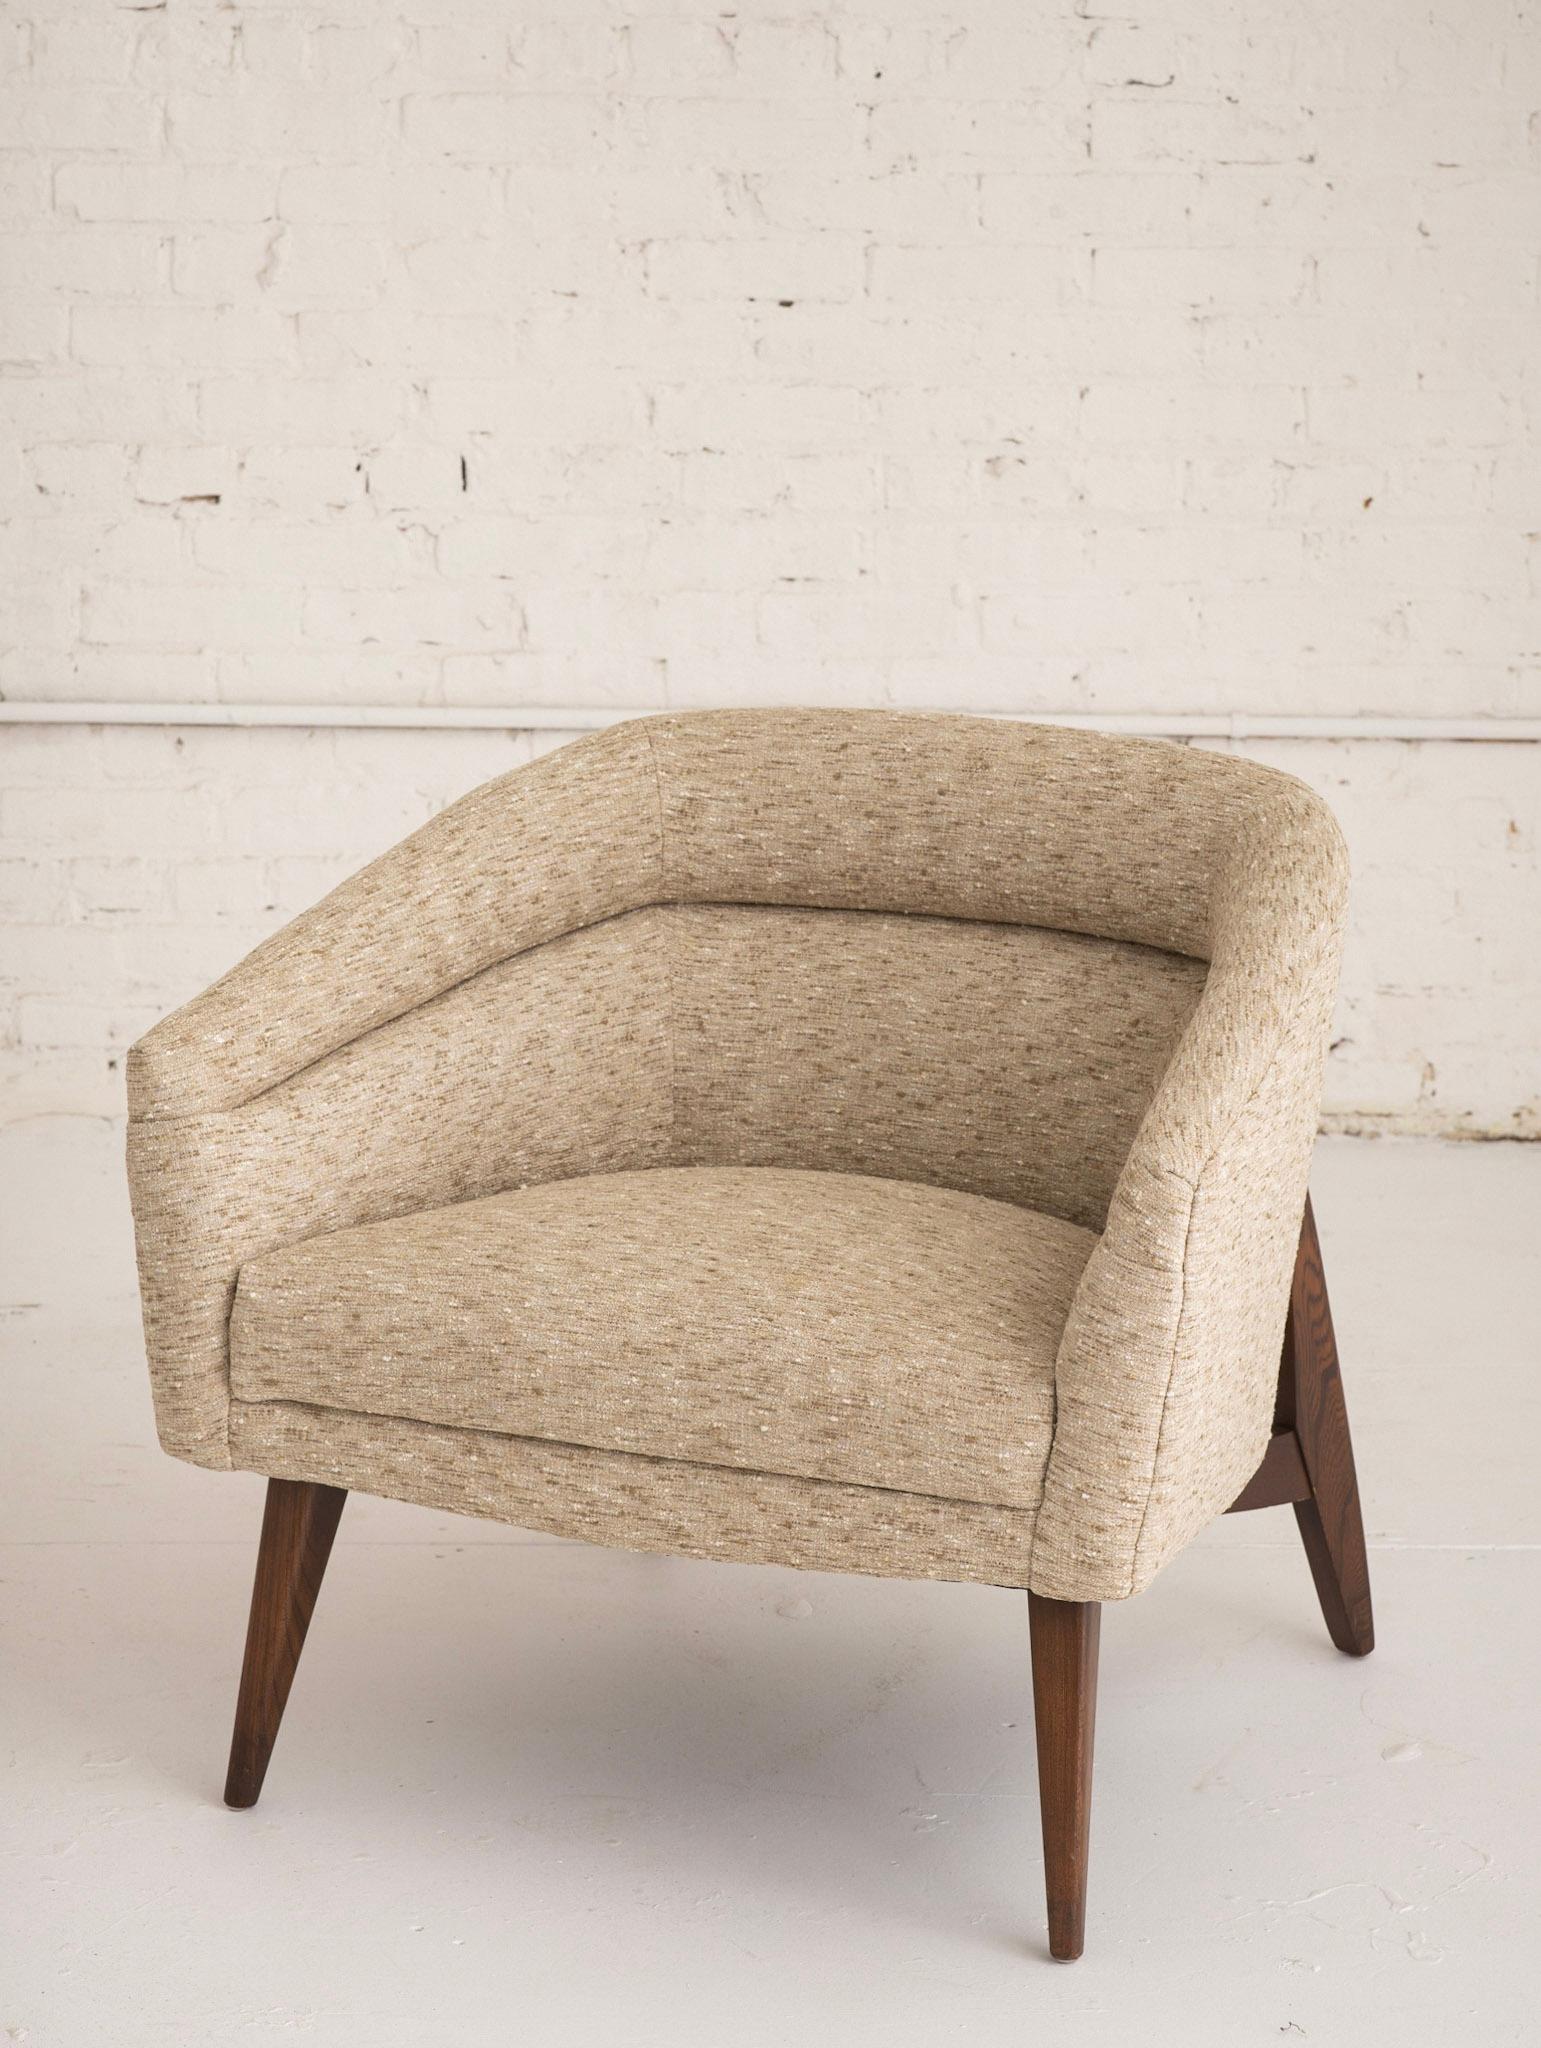 Classic mid century lines on this sleek bucket chair. Newly upholstered in a textured woven fabric. Solid wood frame.